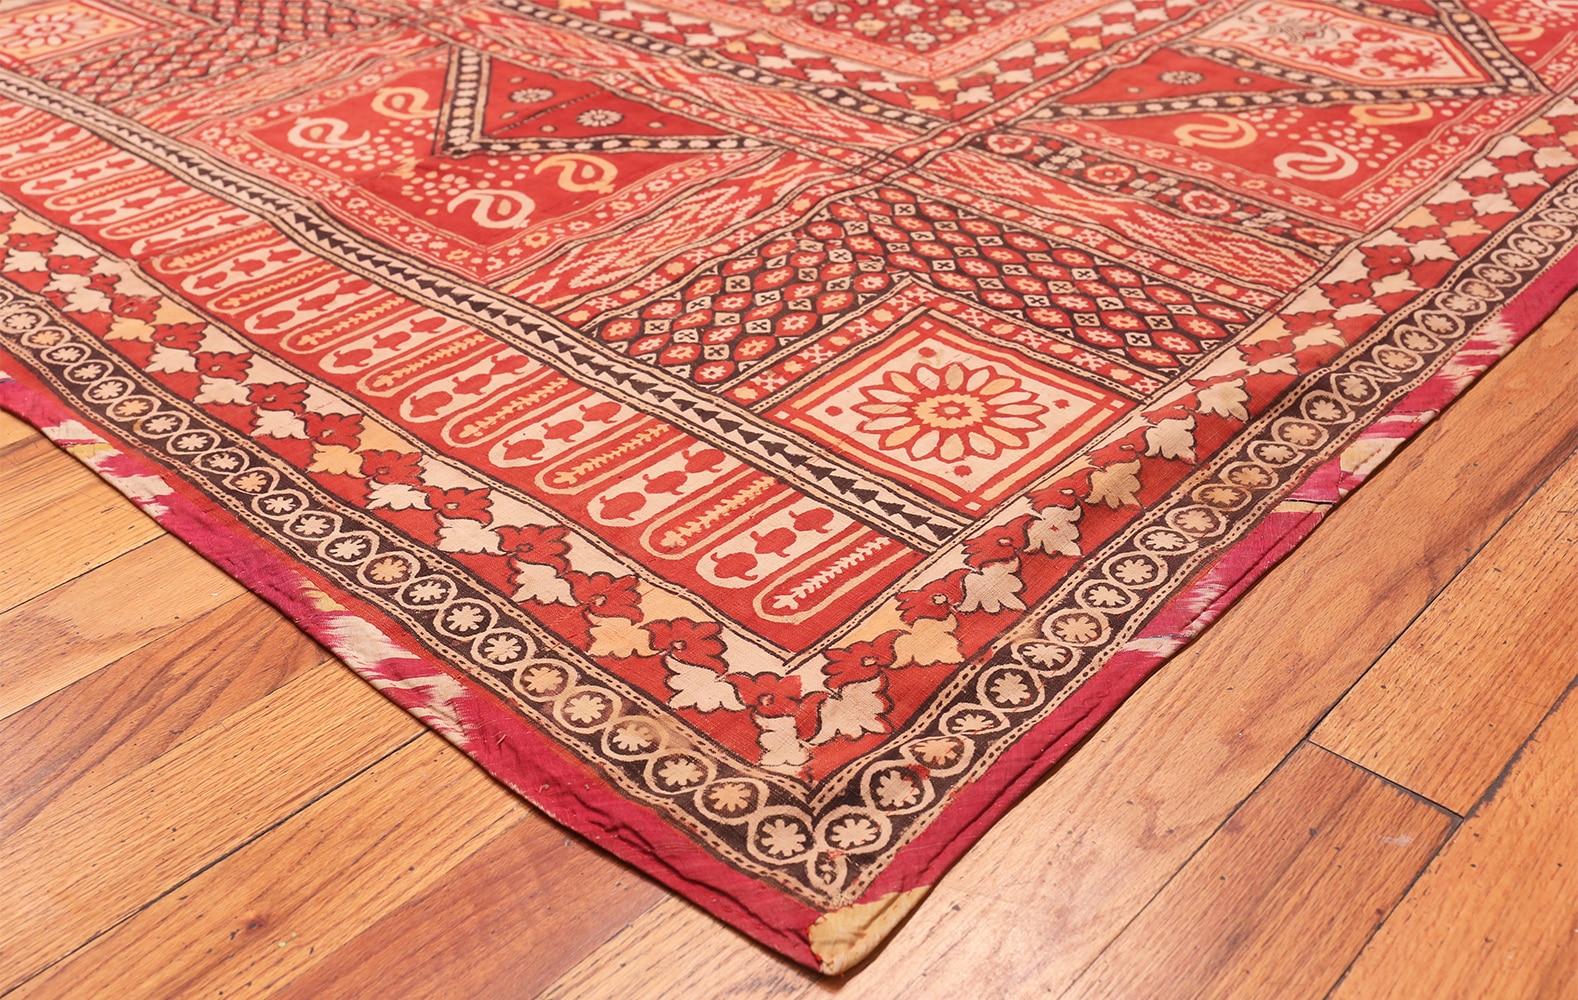 Hand-Woven Antique Uzbek Embroidery Textile. Size: 5 ft 6 in x 6 ft 8 in